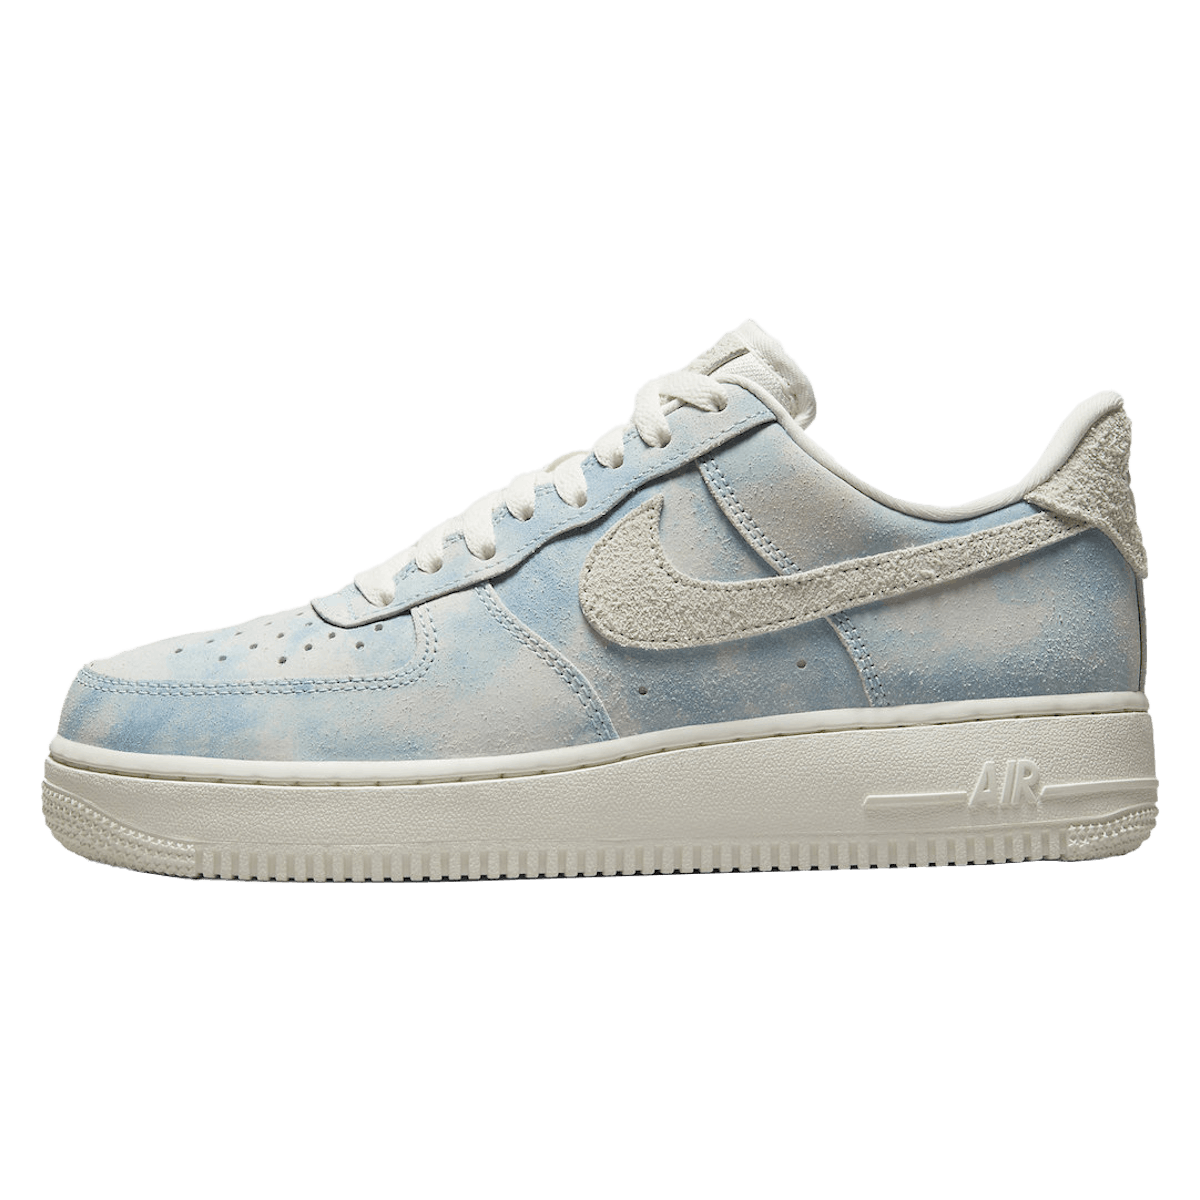 Nike Air Force 1 Low WMNS "Clouds"